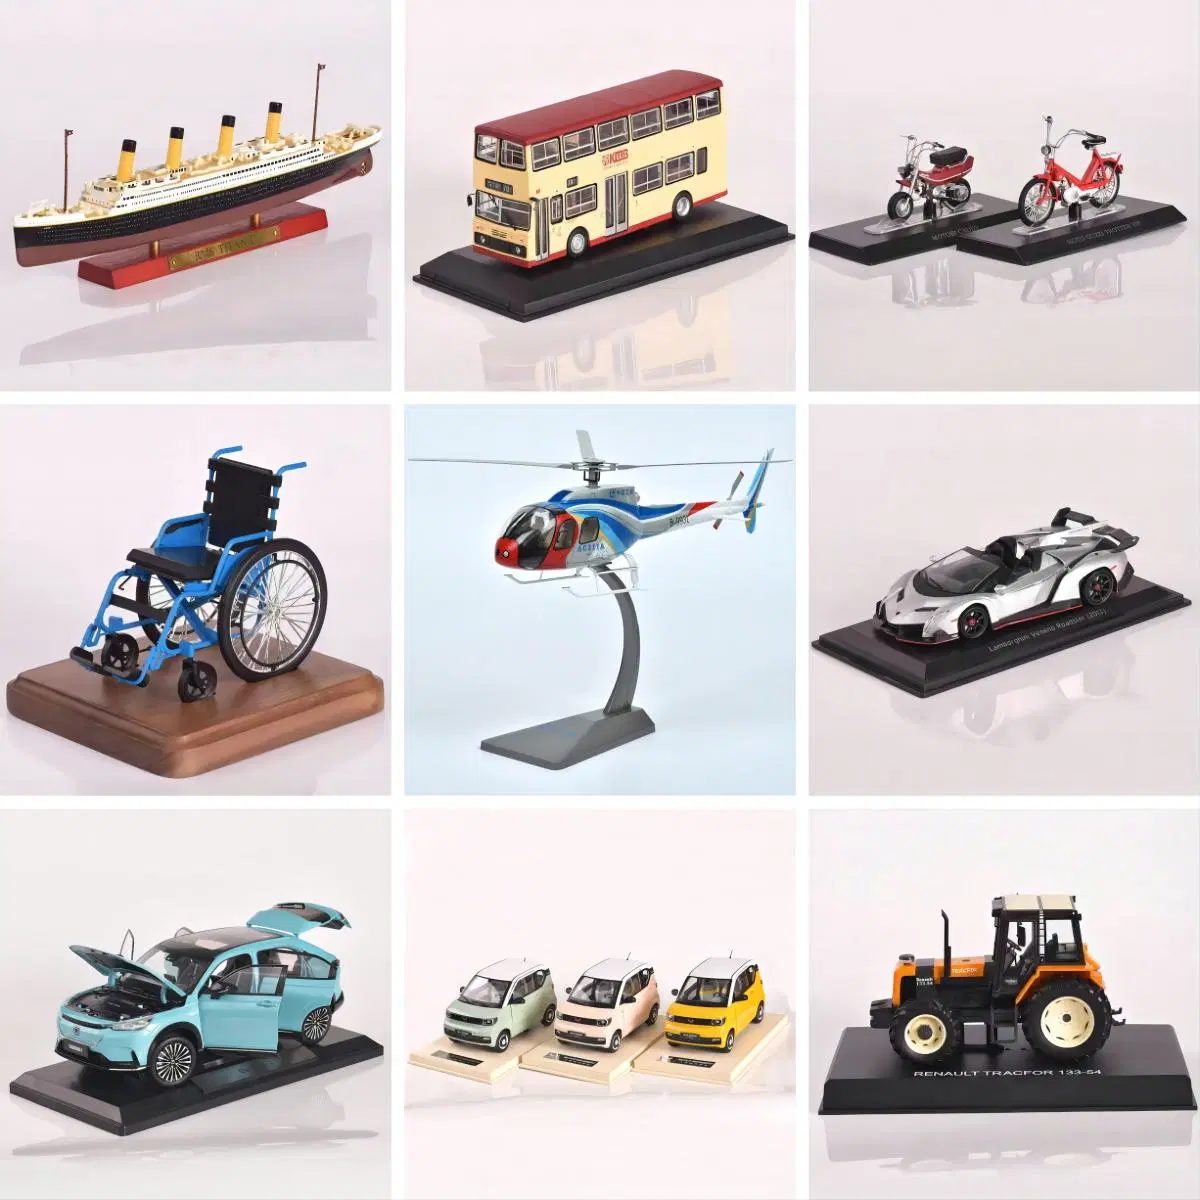 OEM Factory Customized Model Miniature Toys Wholesale/Supplier Helicopter Price Scale Diecast Cars Tank Train Aircraft Die Cast Airplane Model Manufacturer in China